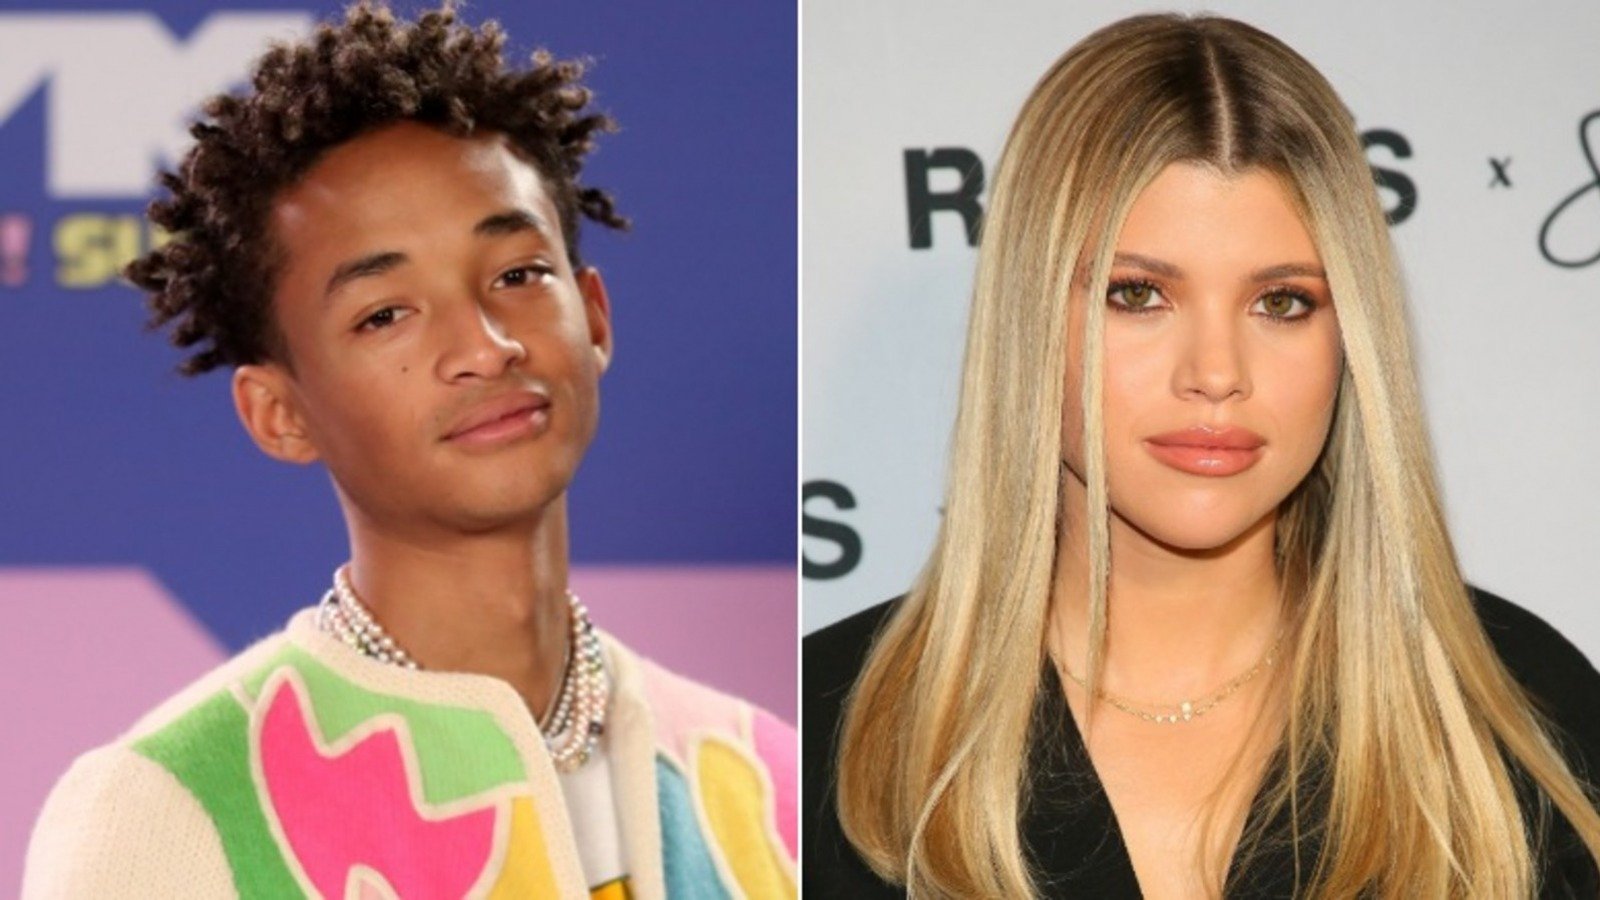 The Truth About Sofia Richie And Jaden Smith